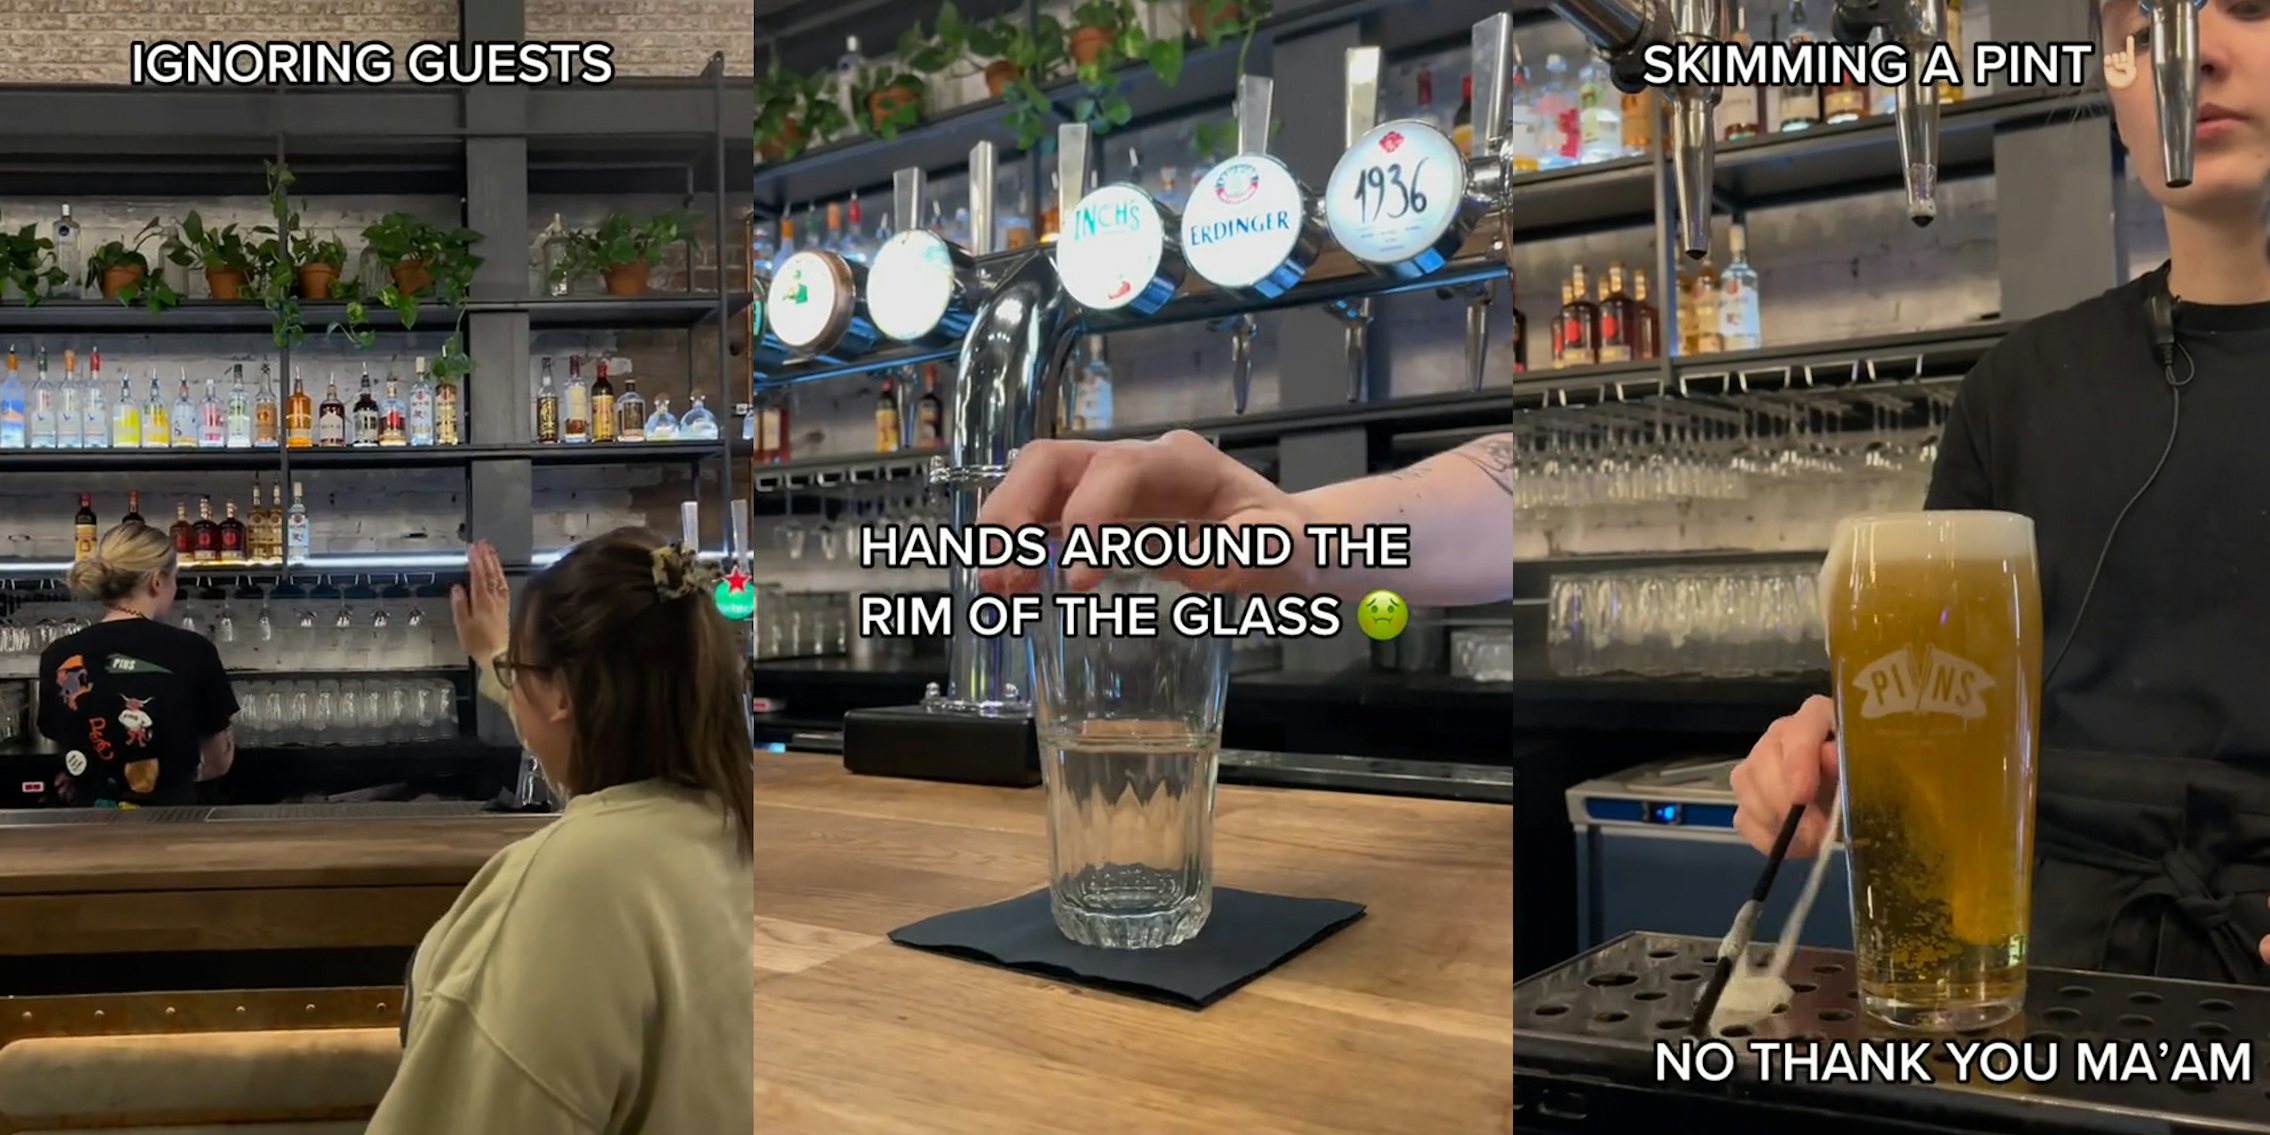 bartender with back towards customer with caption 'IGNORING GUESTS' (l) bartender holding glass with hand on rim with caption 'HANDS AROUND THE RIM' (c) bartender skimming foam off of pint with caption 'SKIMMING A PINT NO THANK YOU MAM' (r)